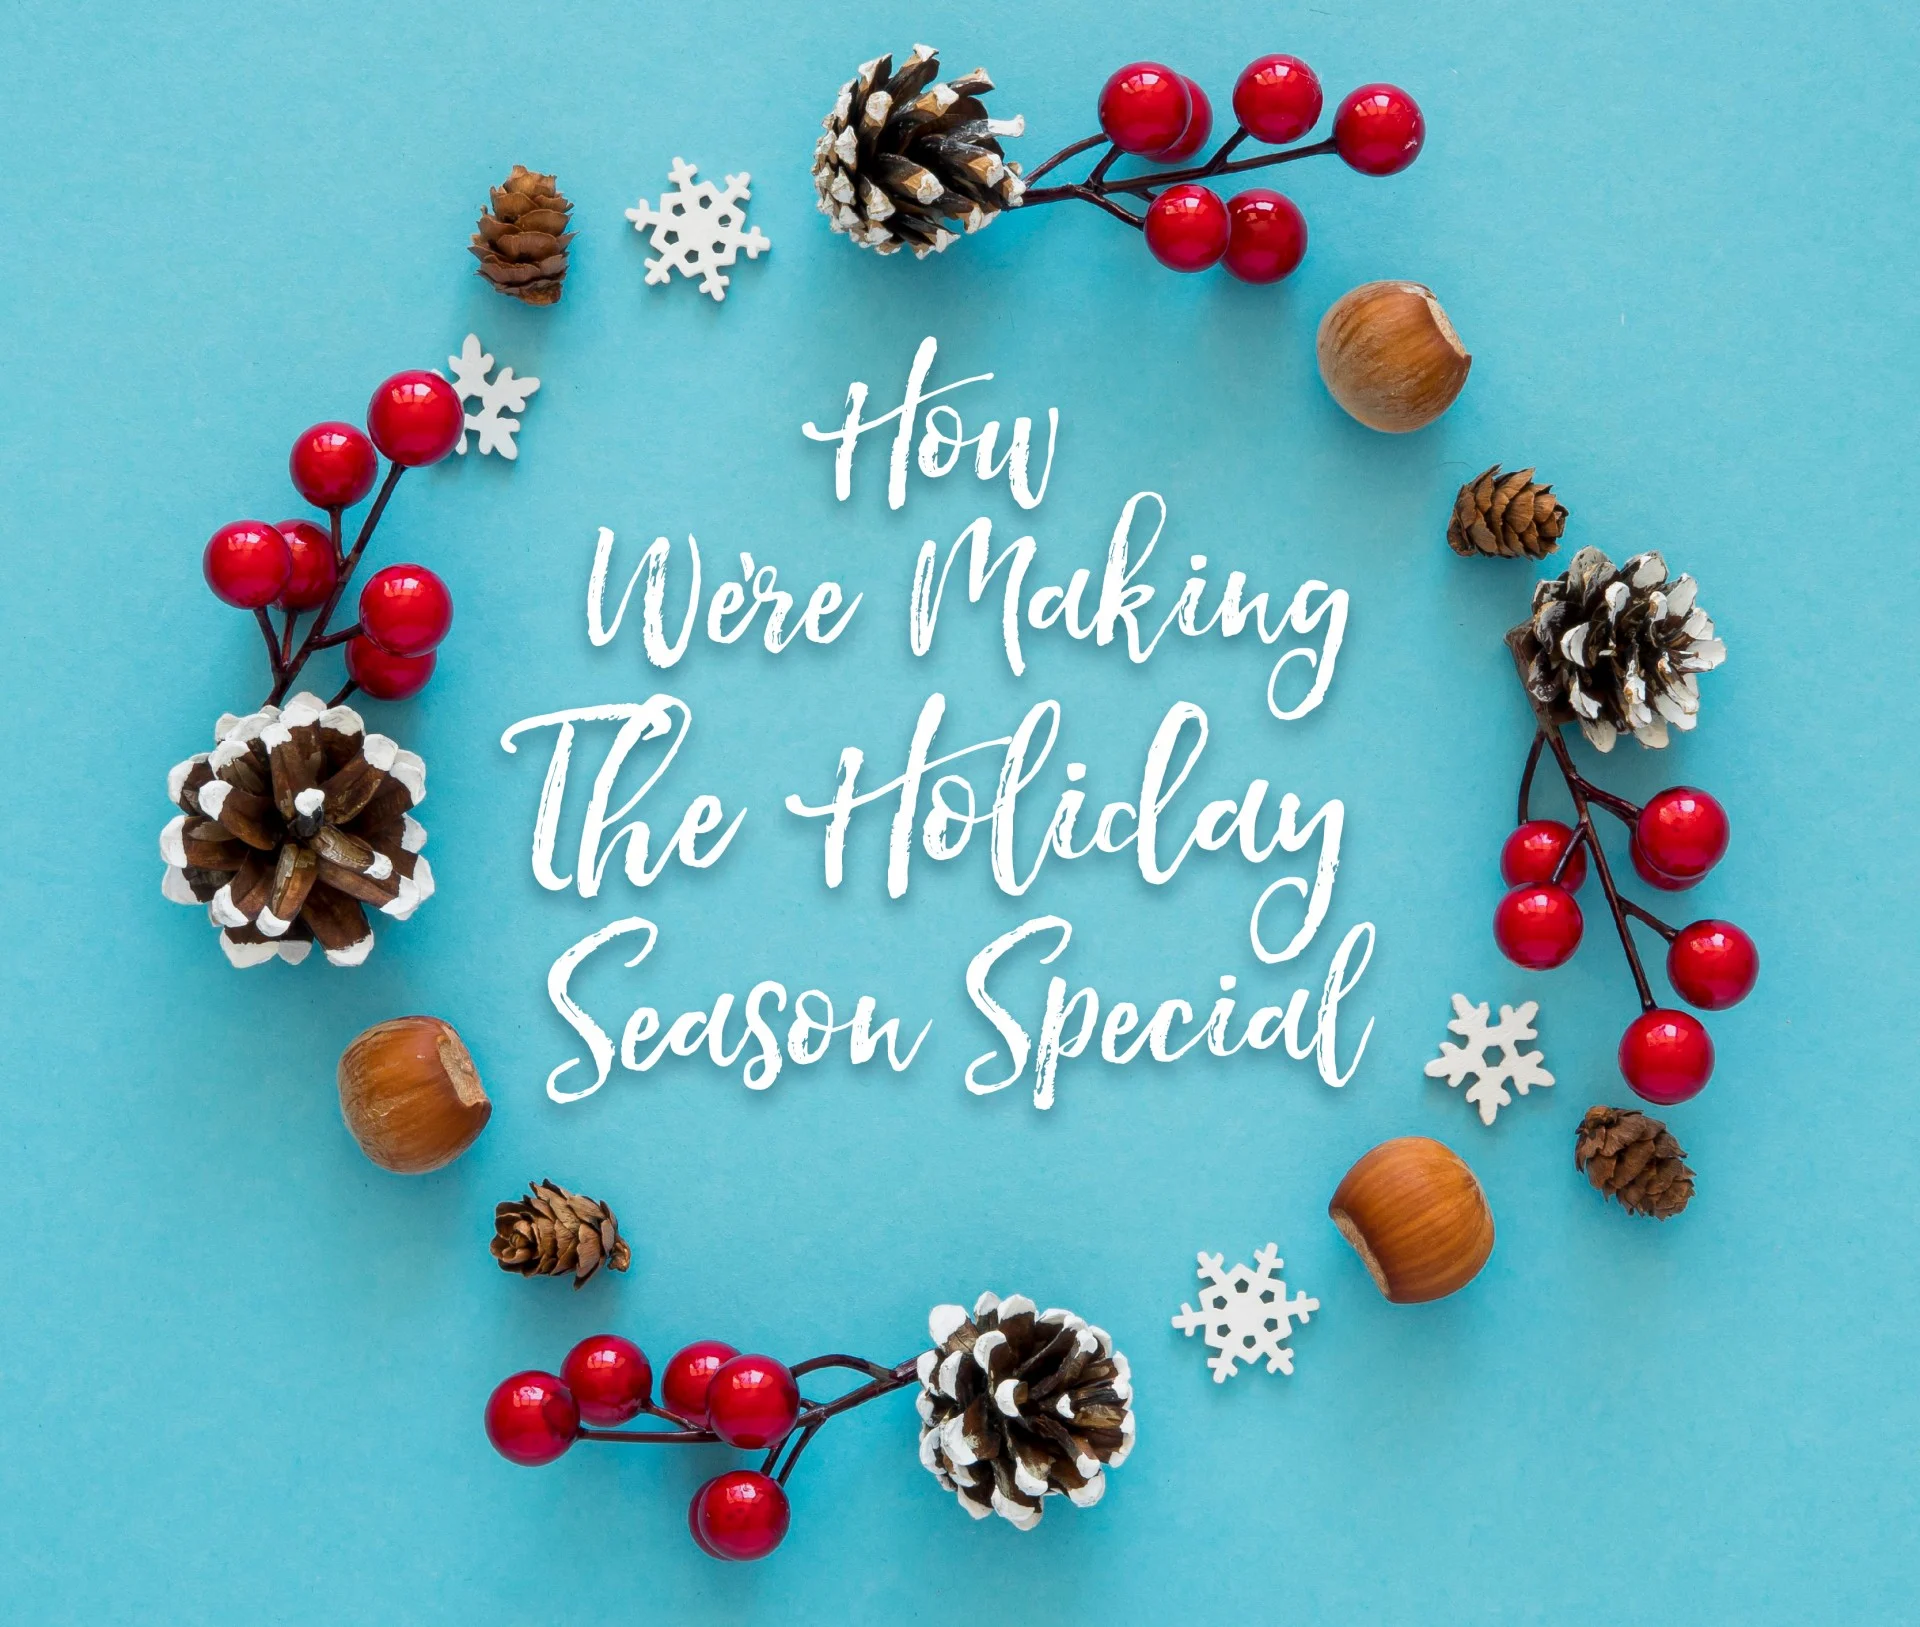 How We’re Making The Holiday Season Special